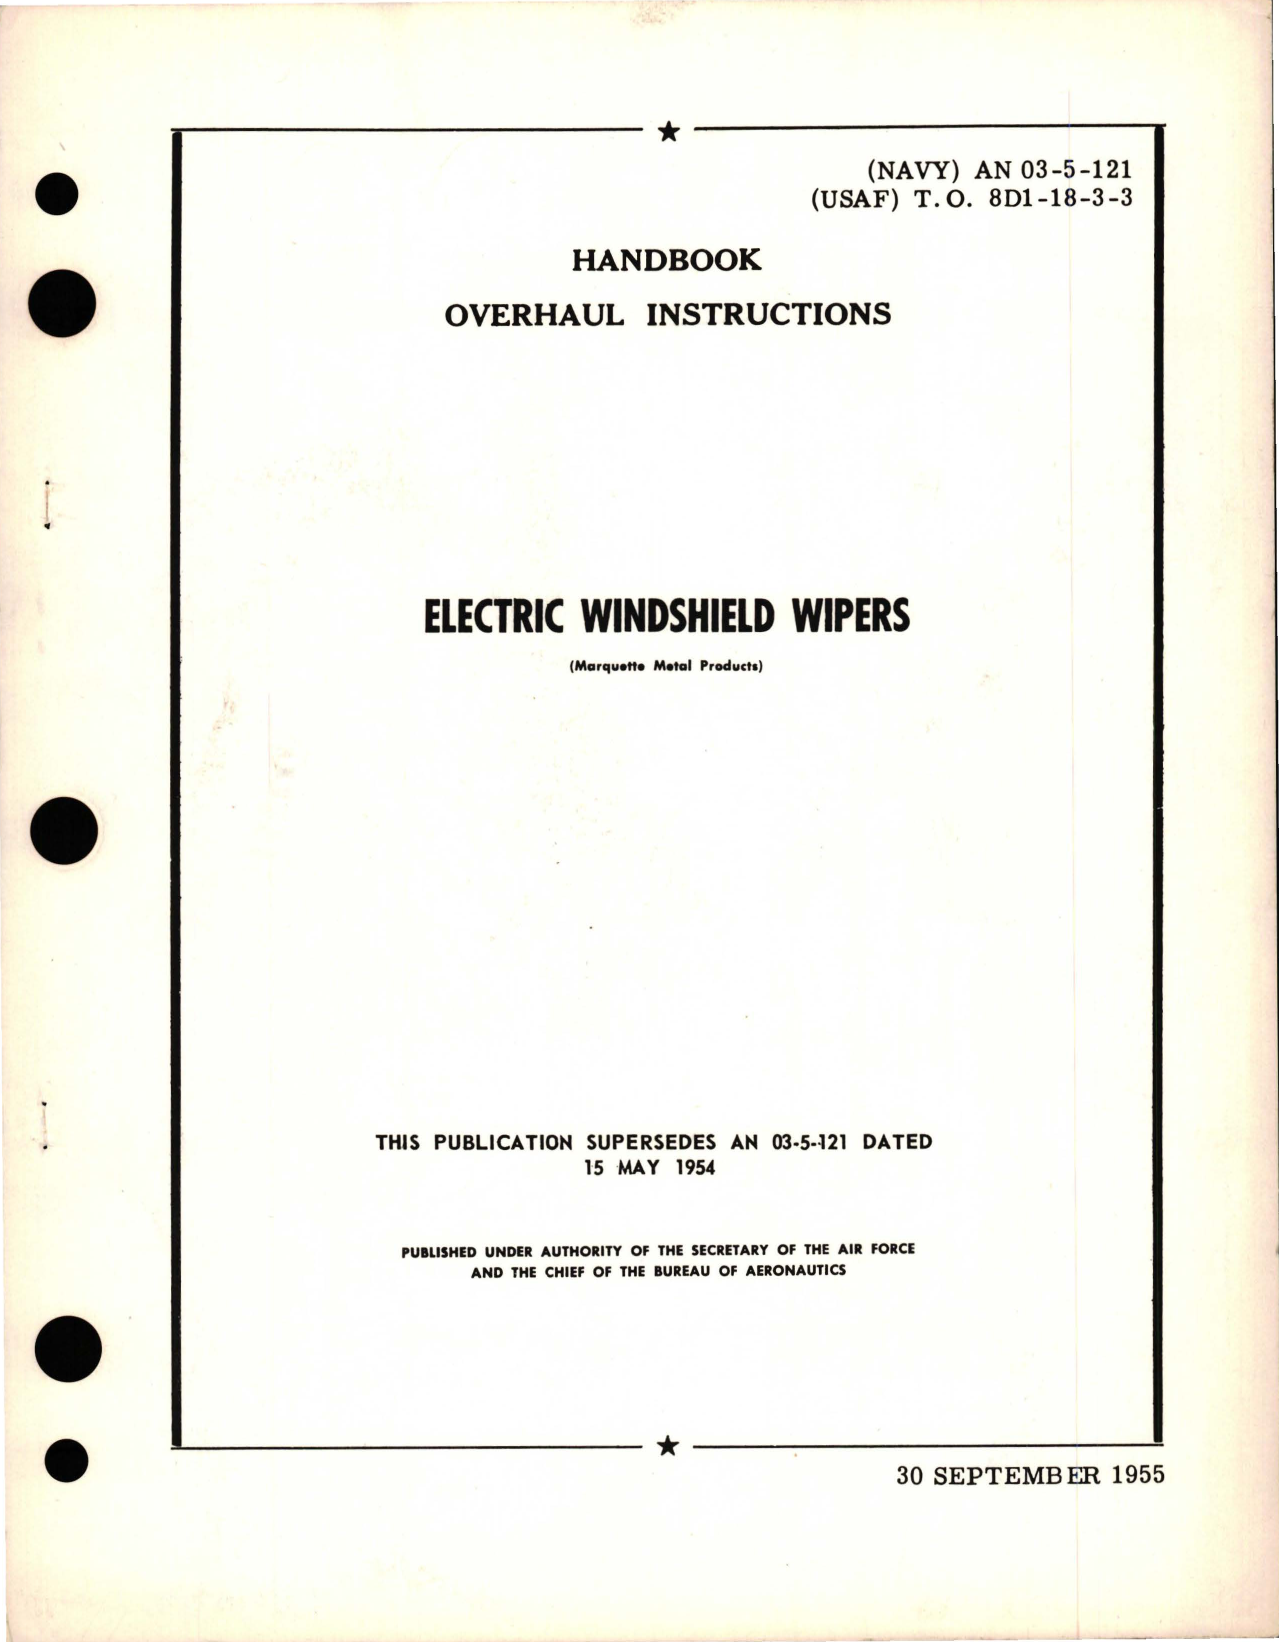 Sample page 1 from AirCorps Library document: Overhaul Instructions for Electric Windshield Wipers